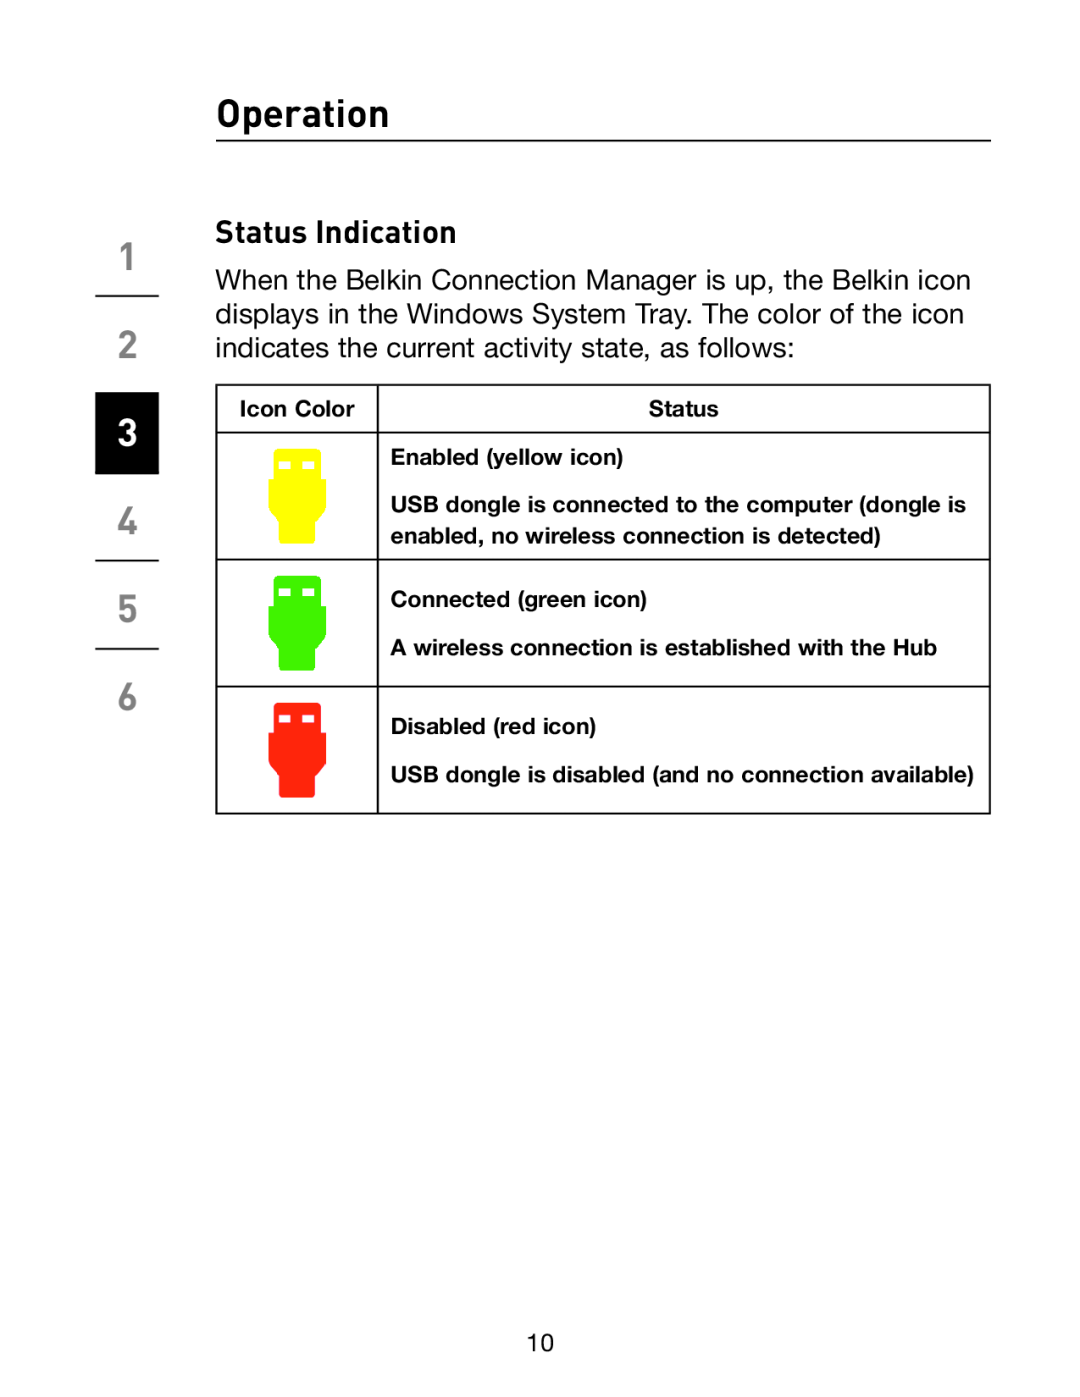 Belkin F5U301 user manual Operation, Status Indication, Icon Color, Enabled yellow icon, Connected green icon 